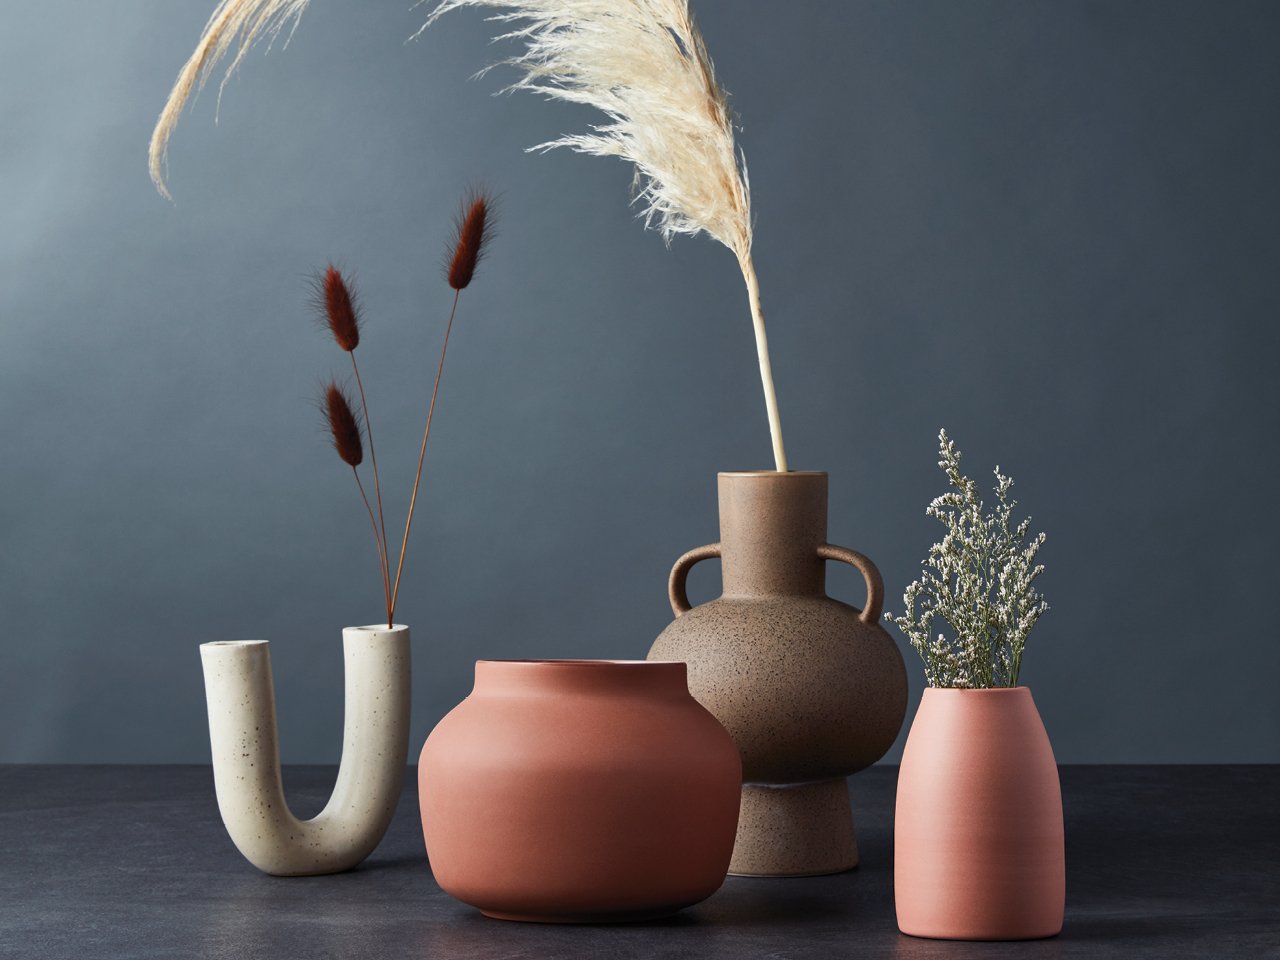 The best vases to cluster for fall decorating.